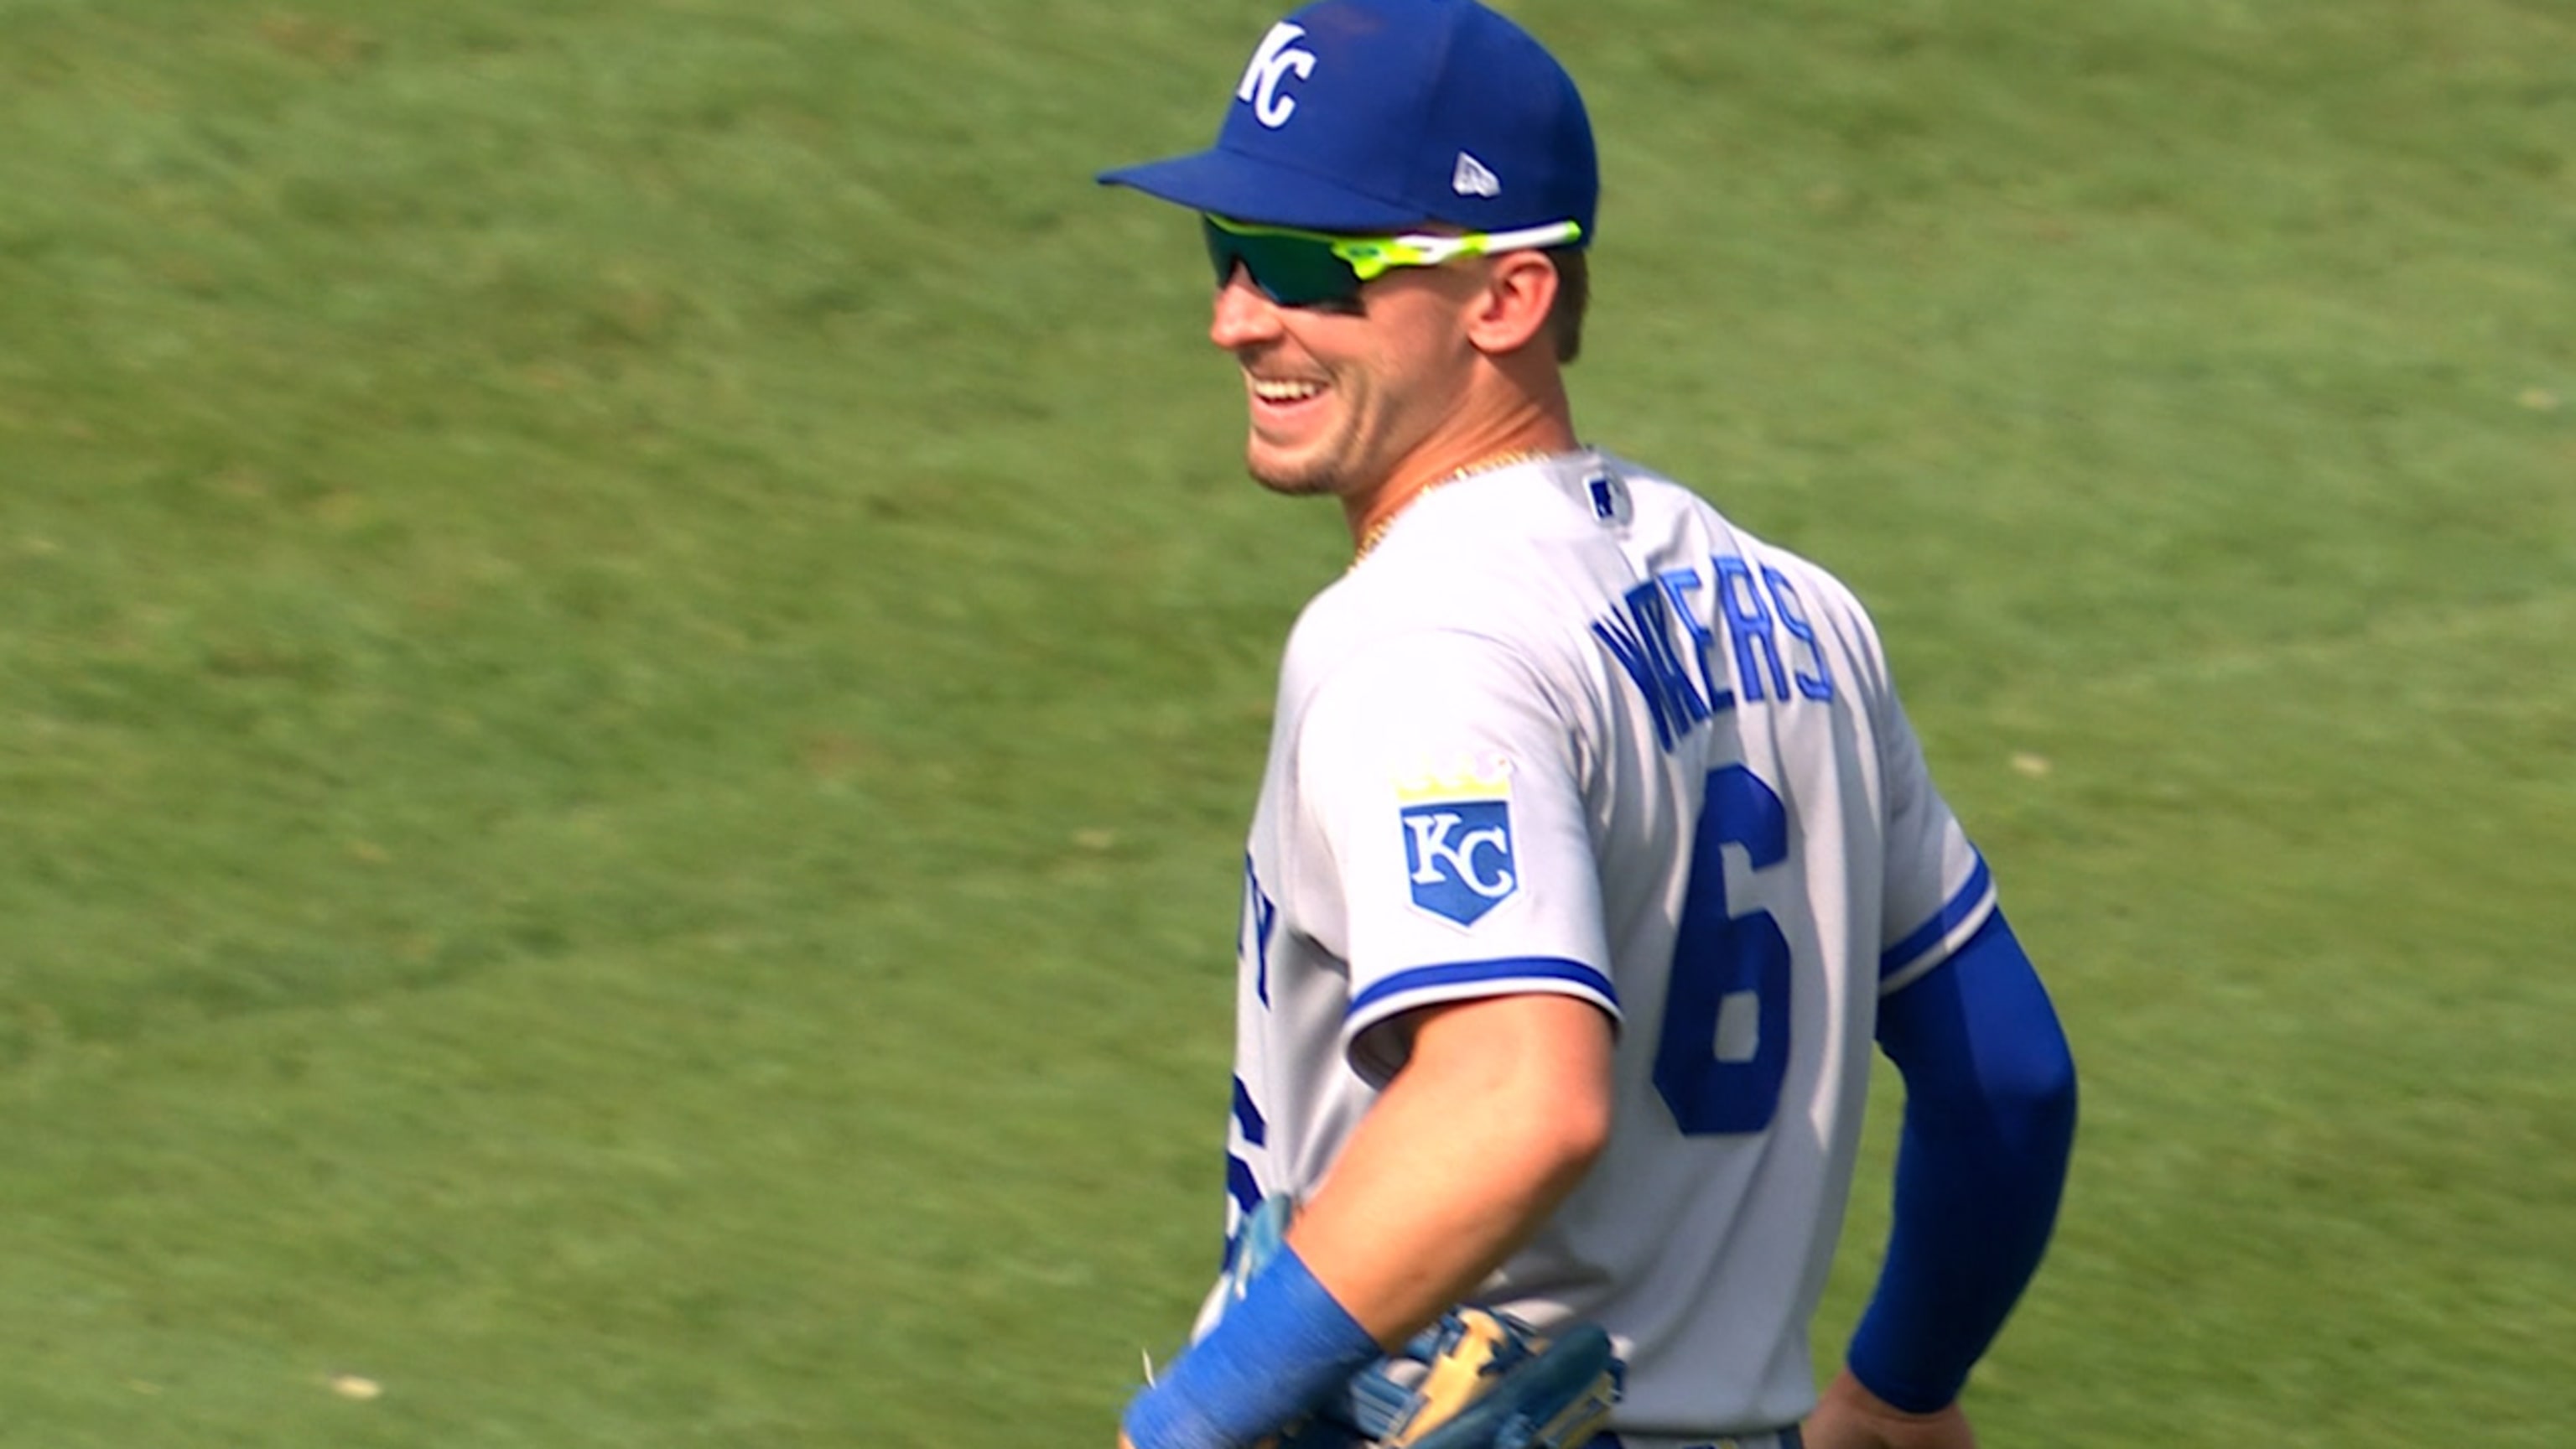 Bobby Witt Jr. hits go-ahead homer and Royals end skid with 4-3 win vs Cubs  - Record Herald